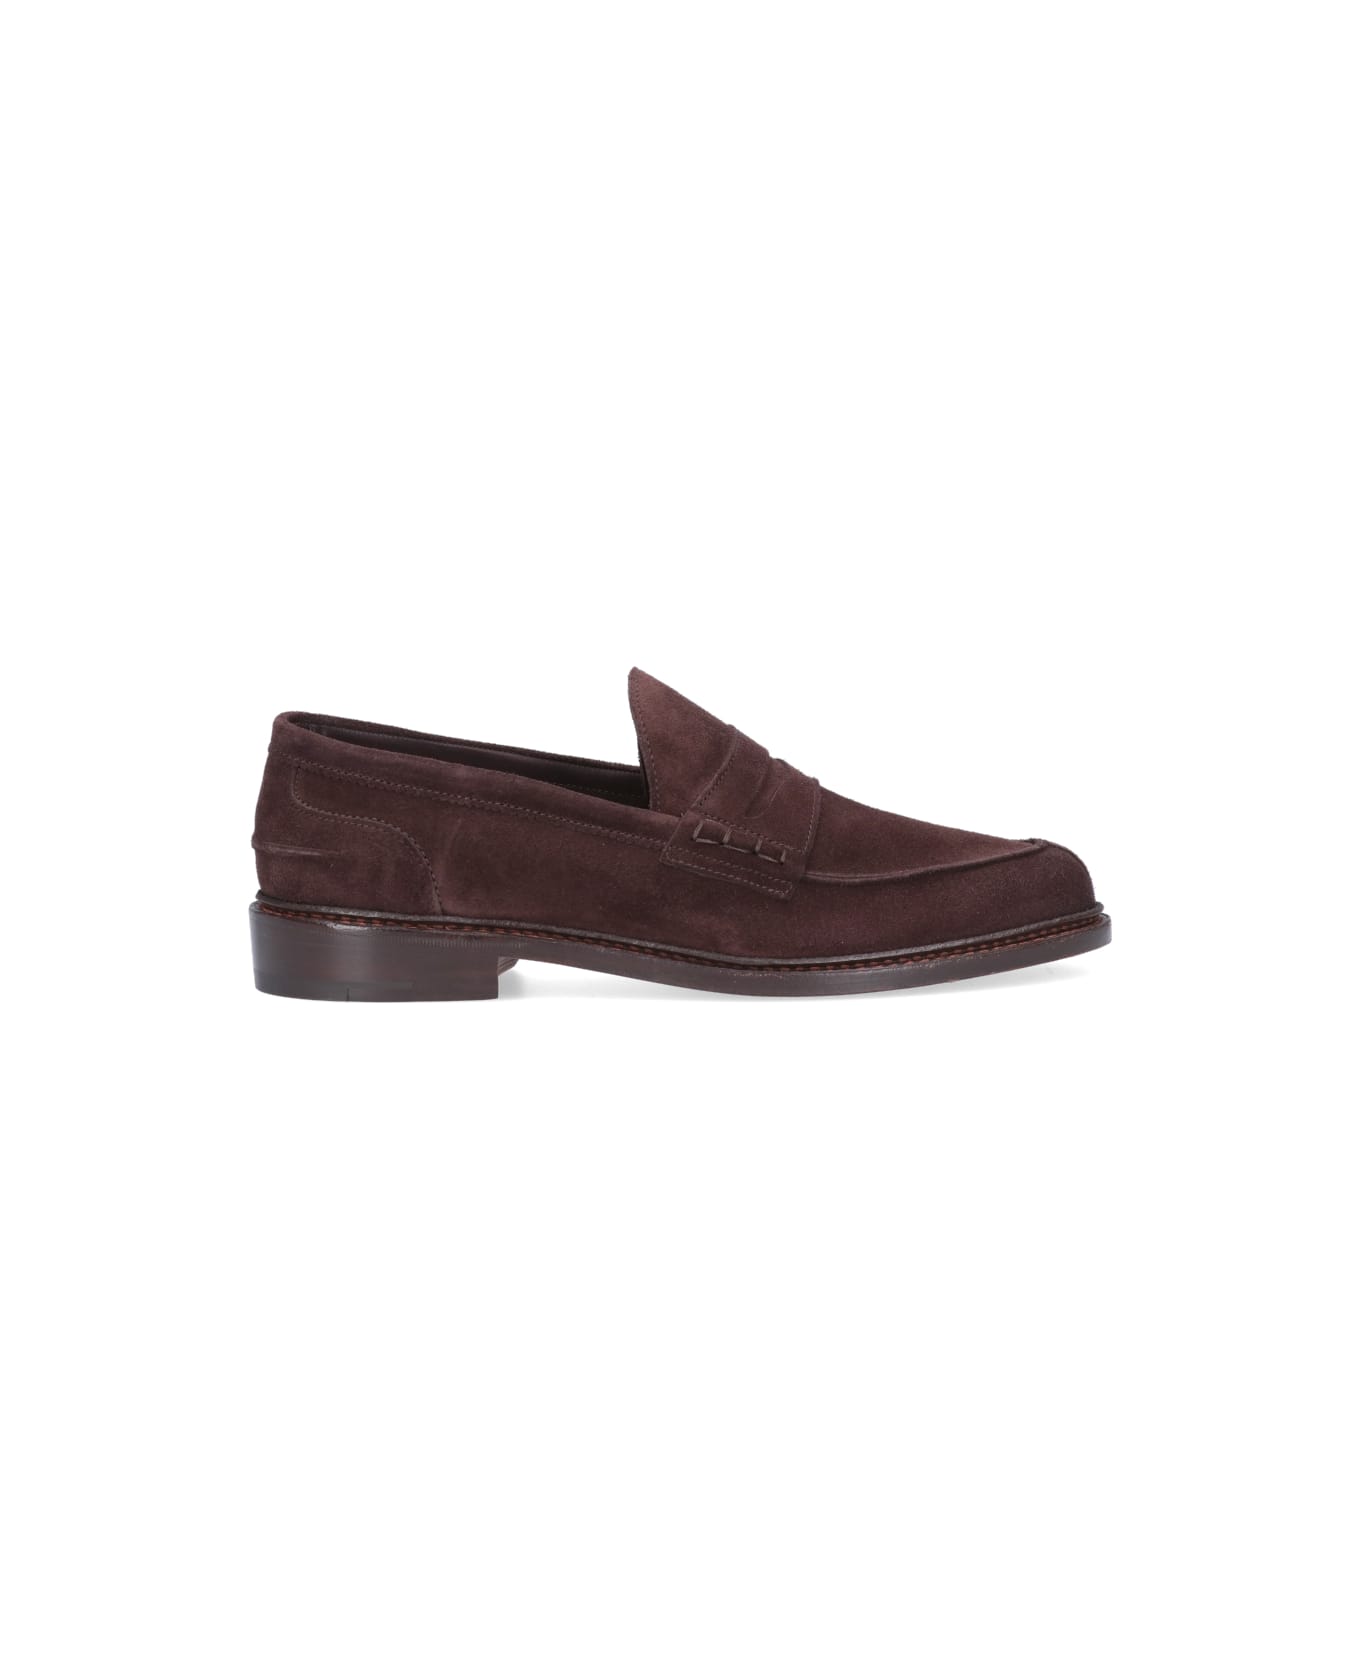 Tricker's Loafers - Brown